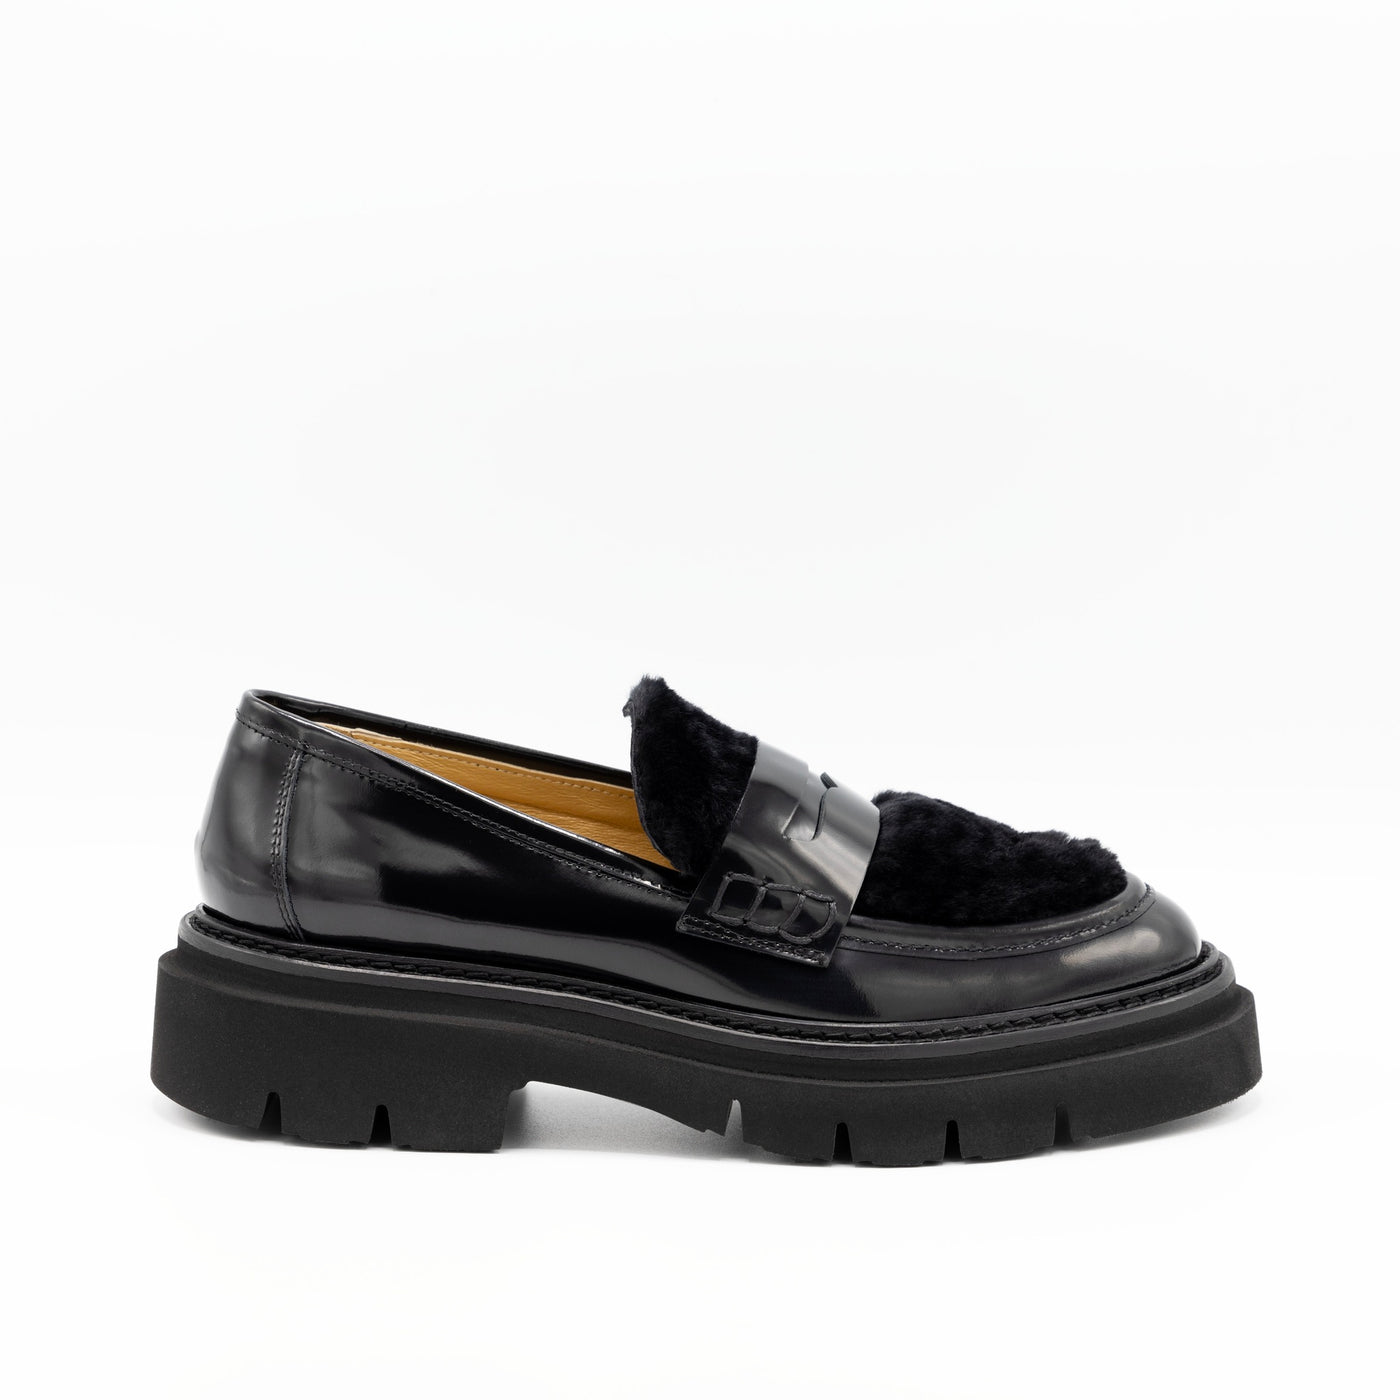 Black leather loafers with shearling uppers.